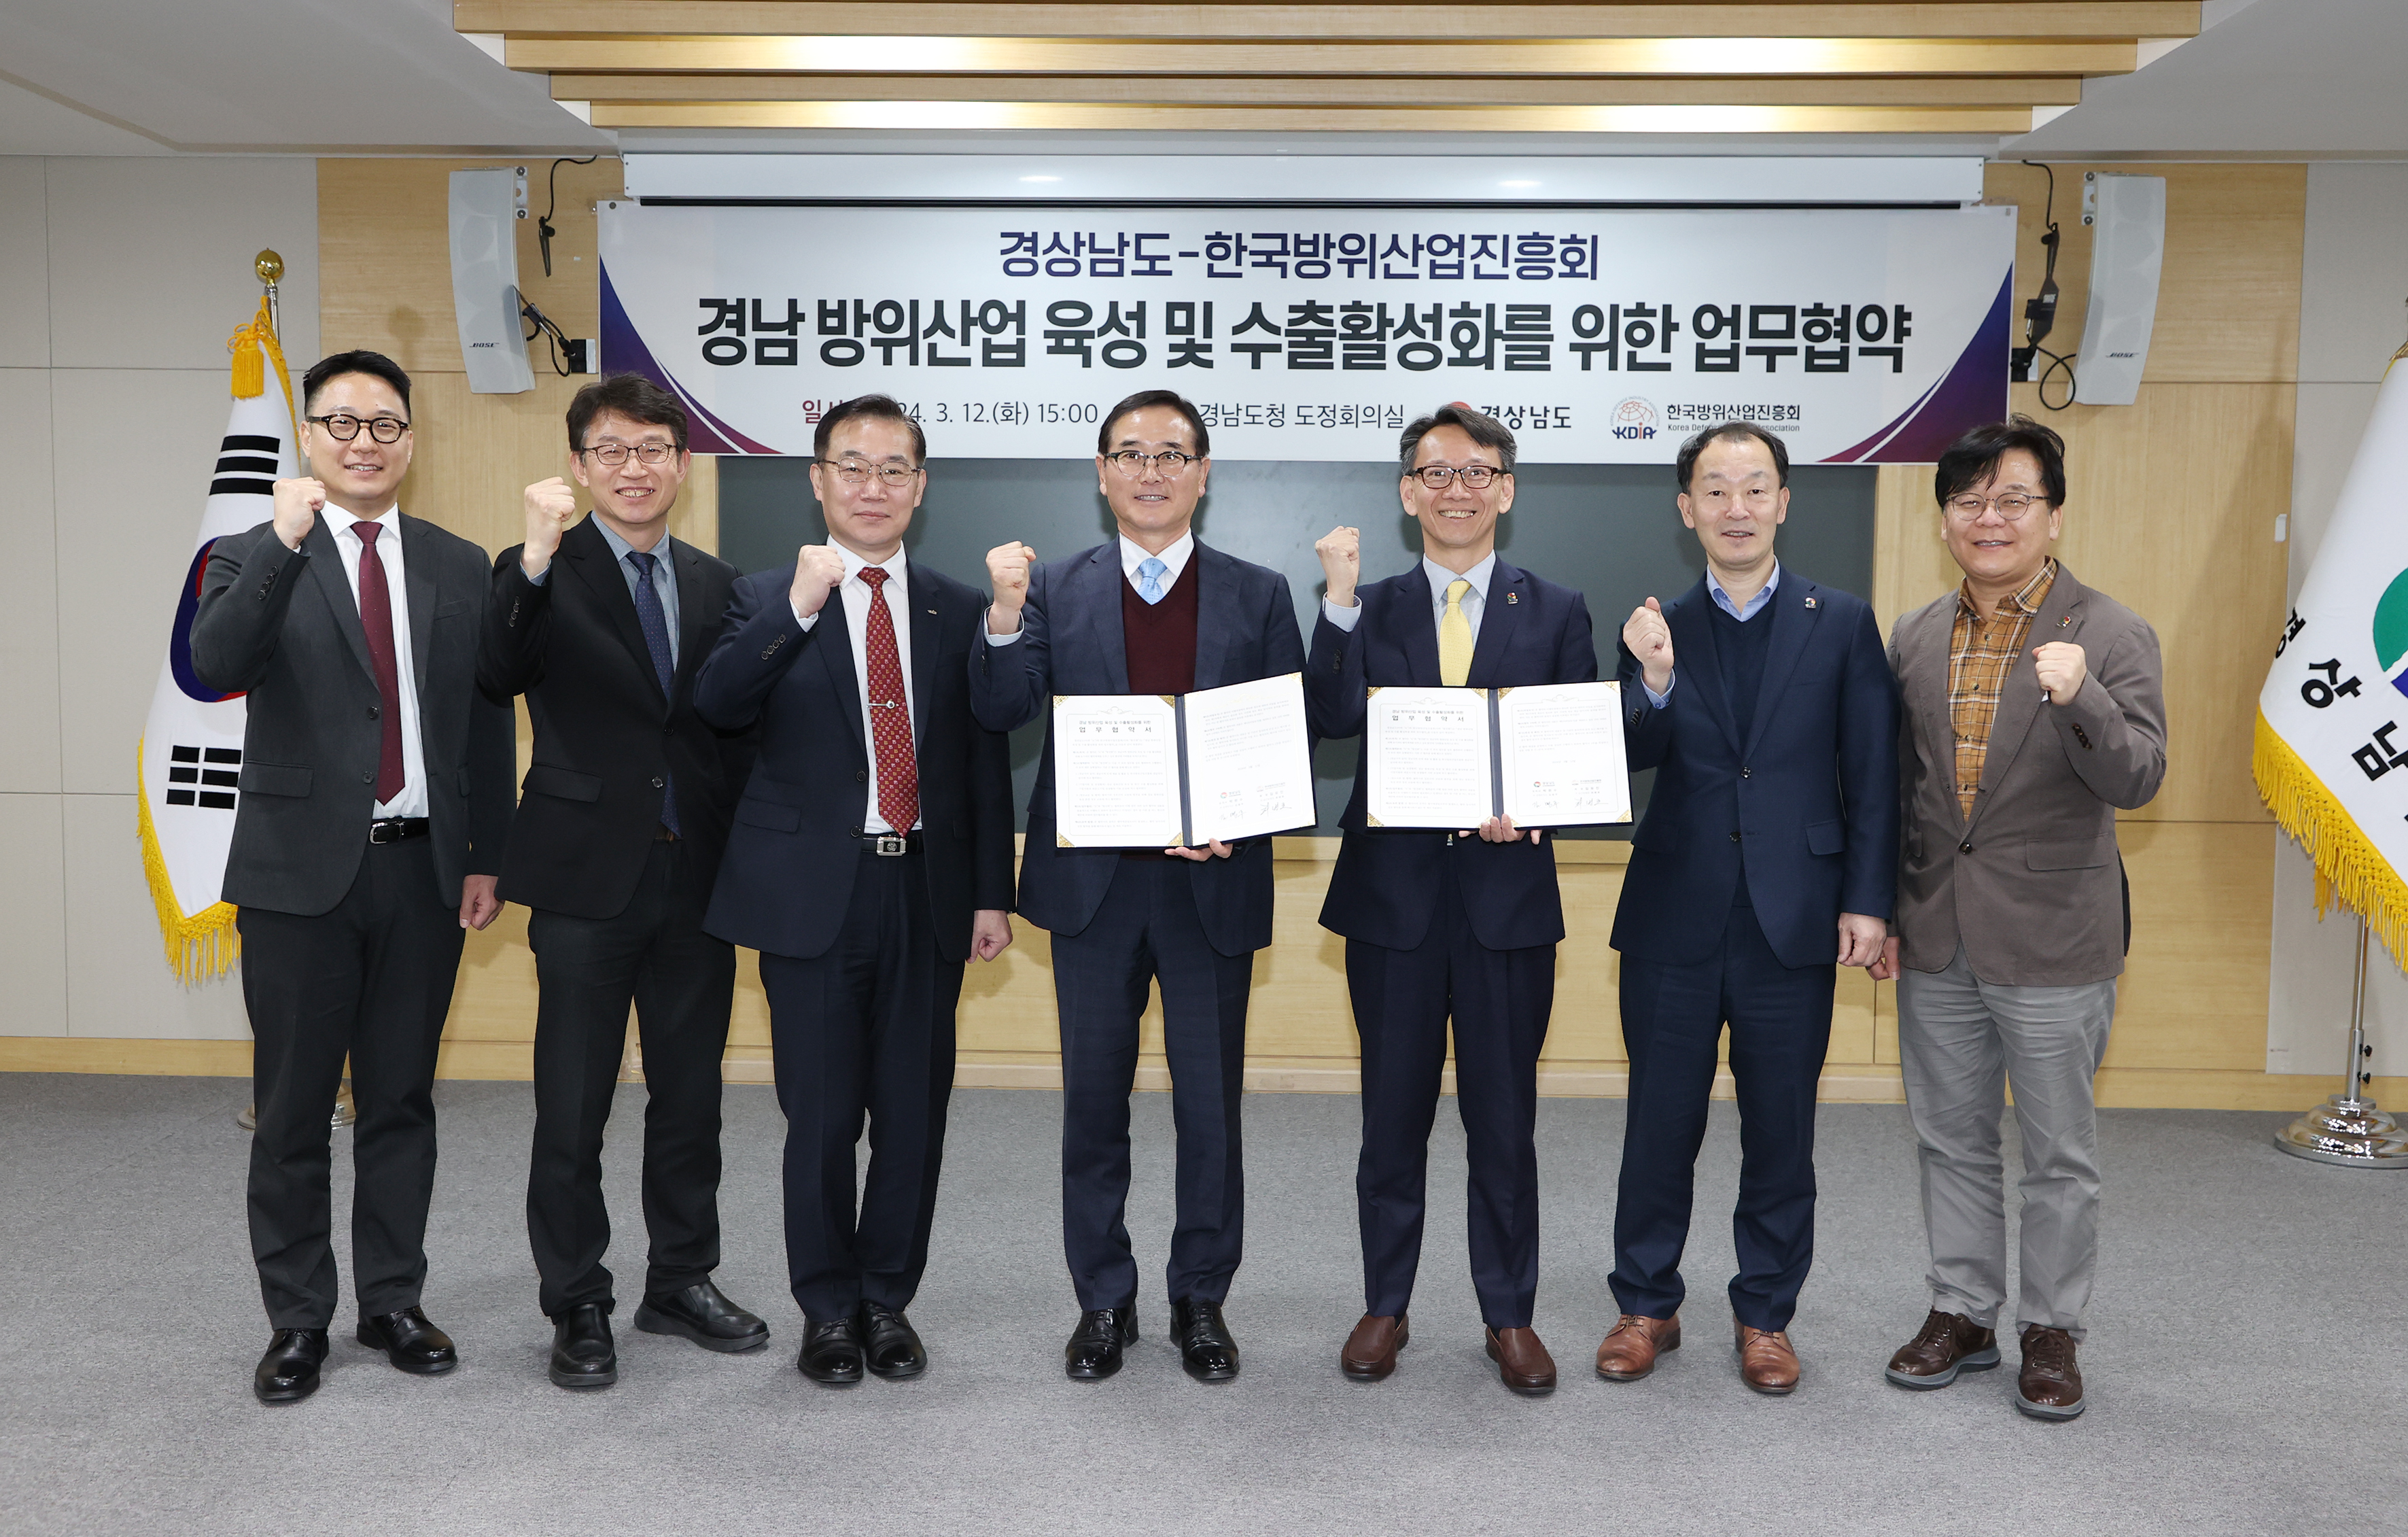 Gyeongsangnam-do and KDIA Sign MoU for the Promotion and Export Expansion of Gyeongsangnam-dos Defense Industry의 파일 이미지